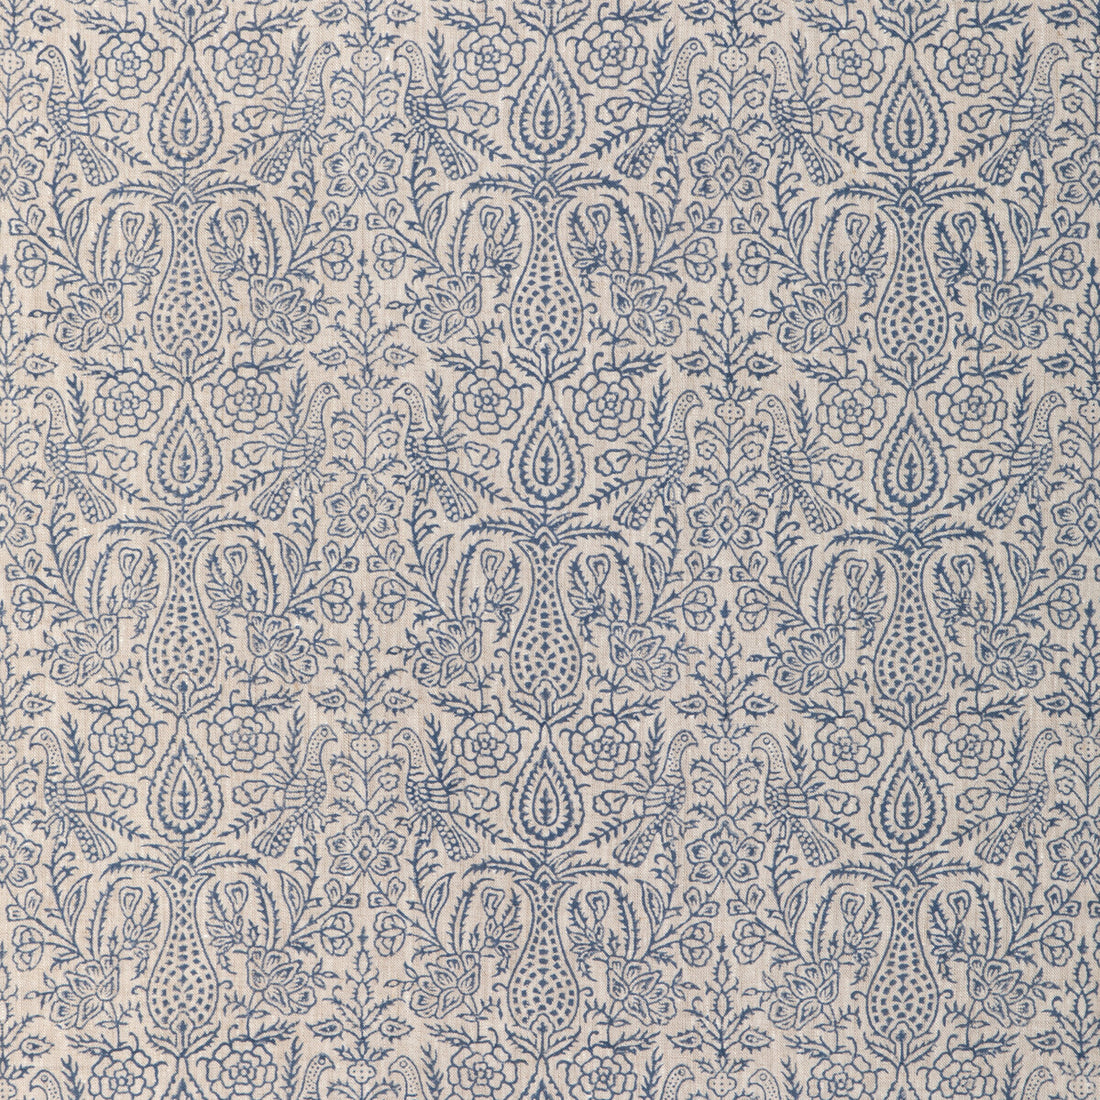 Haven Handblock fabric in indigo color - pattern 2023101.50.0 - by Lee Jofa in the Clare Prints collection